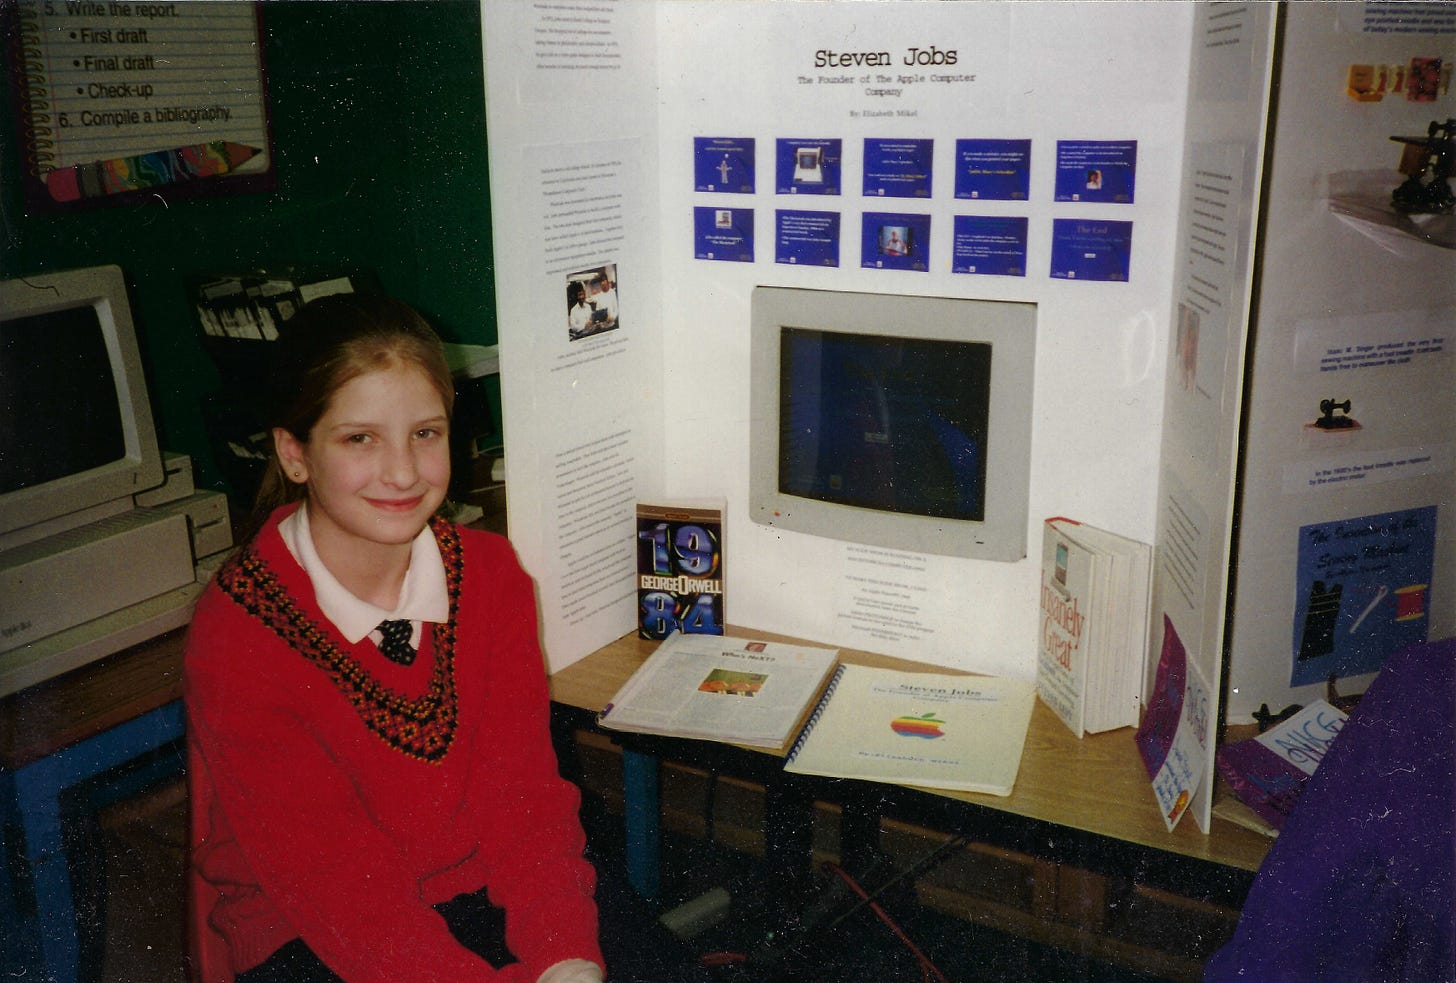 The author as a child wearing a tie and red sweater sitting in front of a posterboard that reads "Steven Jobs: The Found of the Apple Computer Company." An Apple monitor and several books are on display.